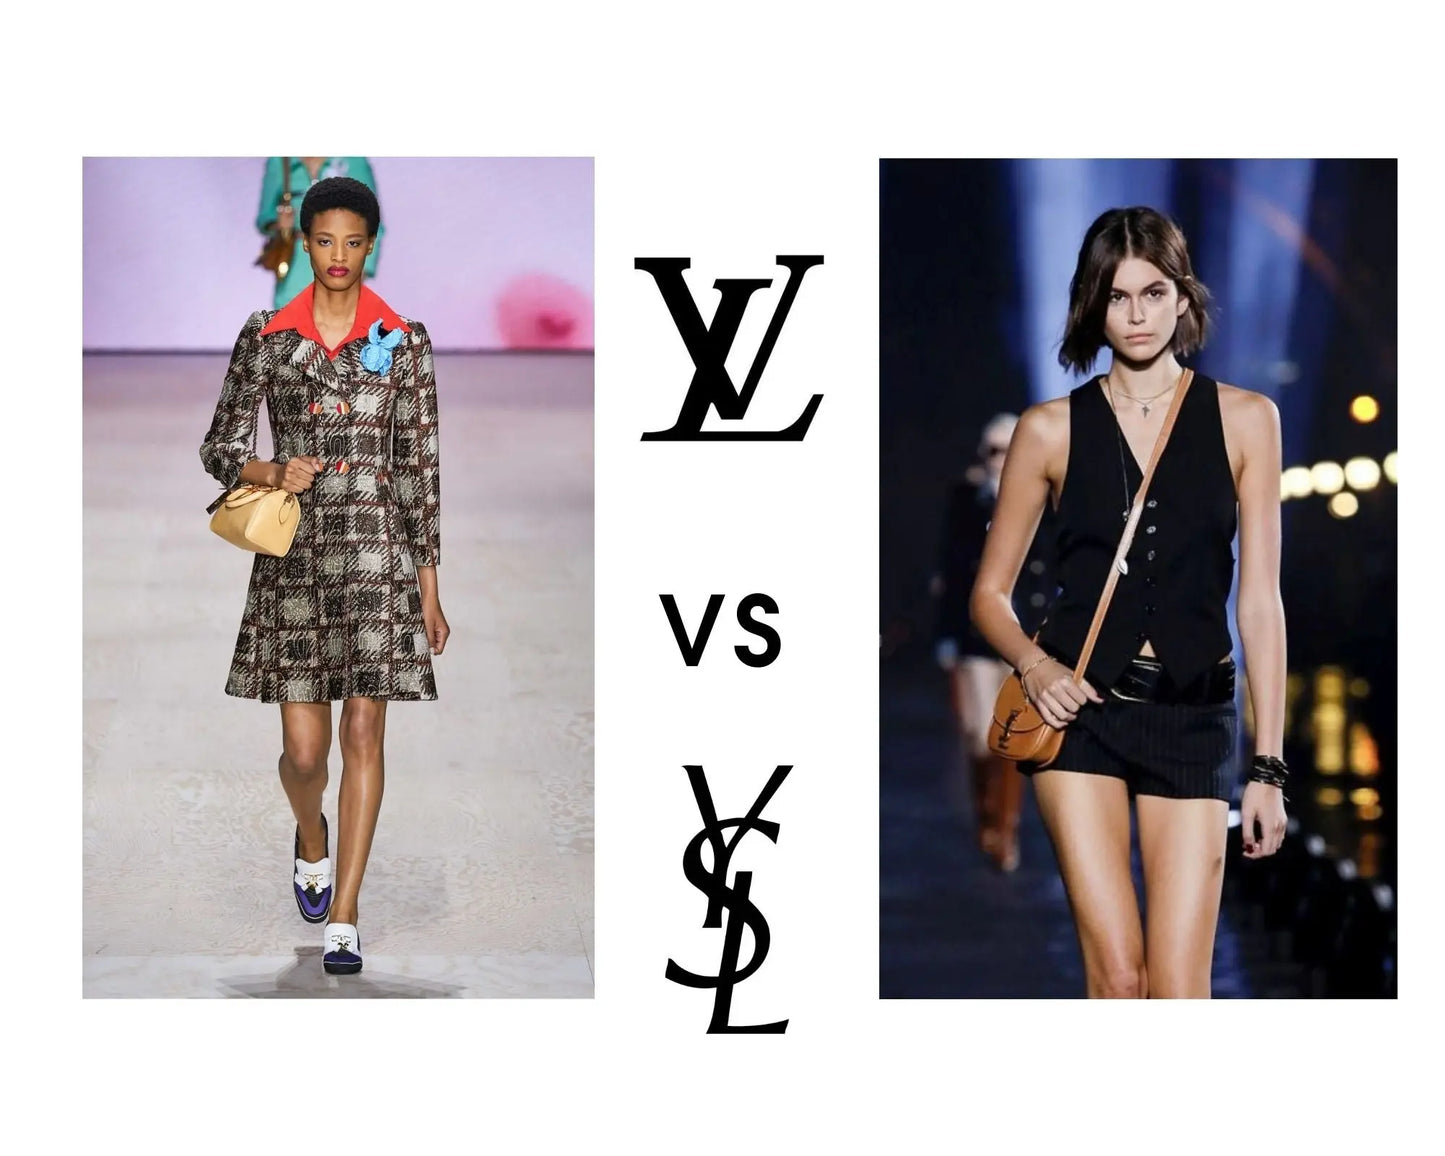 lv vs ysl which brand is better